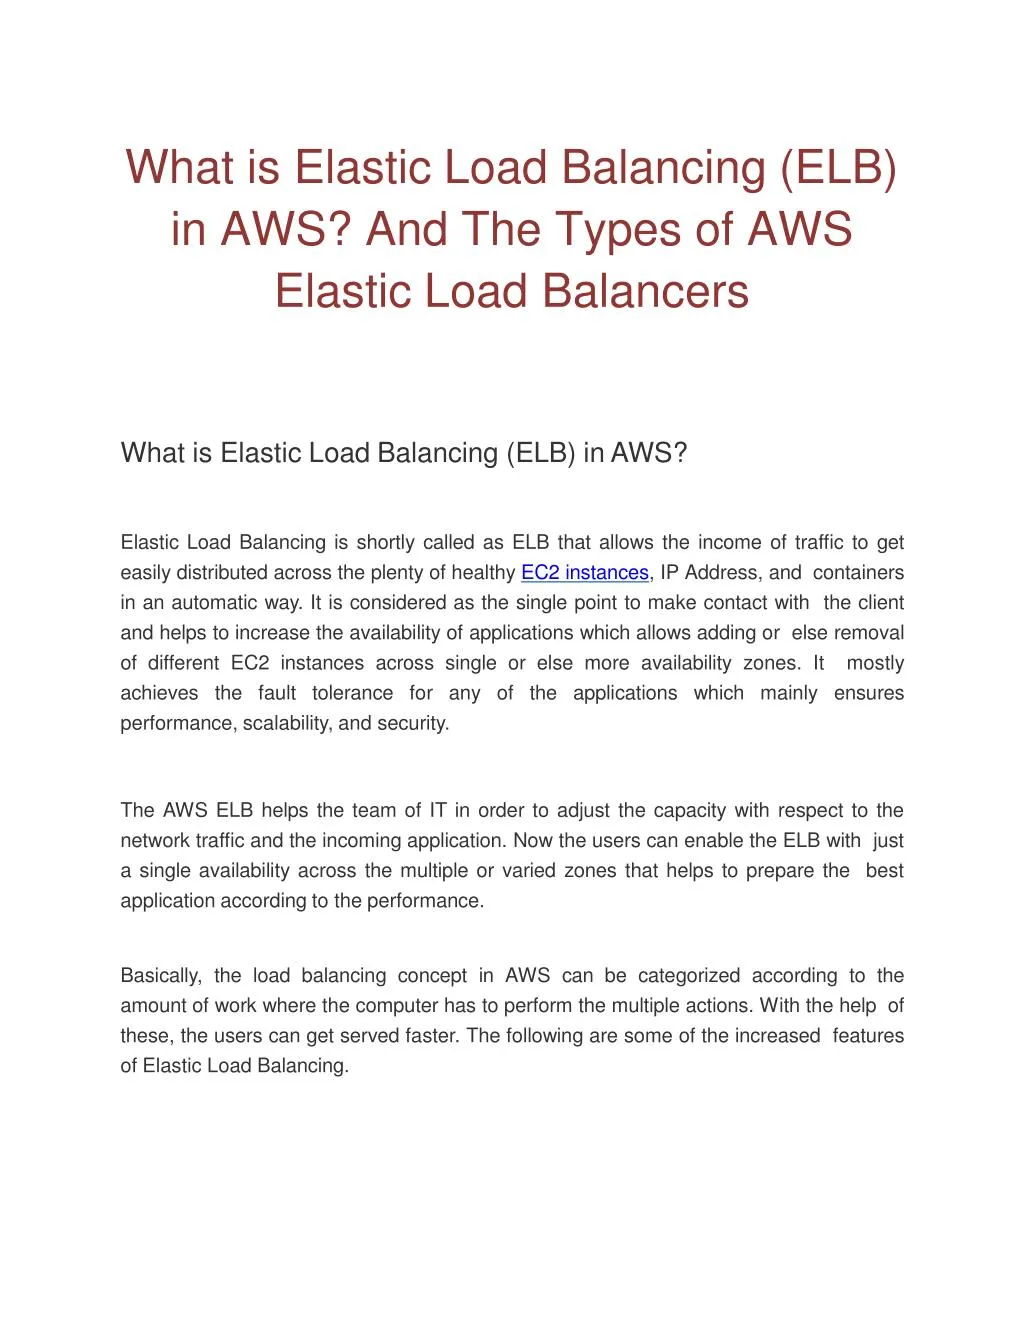 what is elastic load balancing elb in aws and the types of aws elastic load balancers